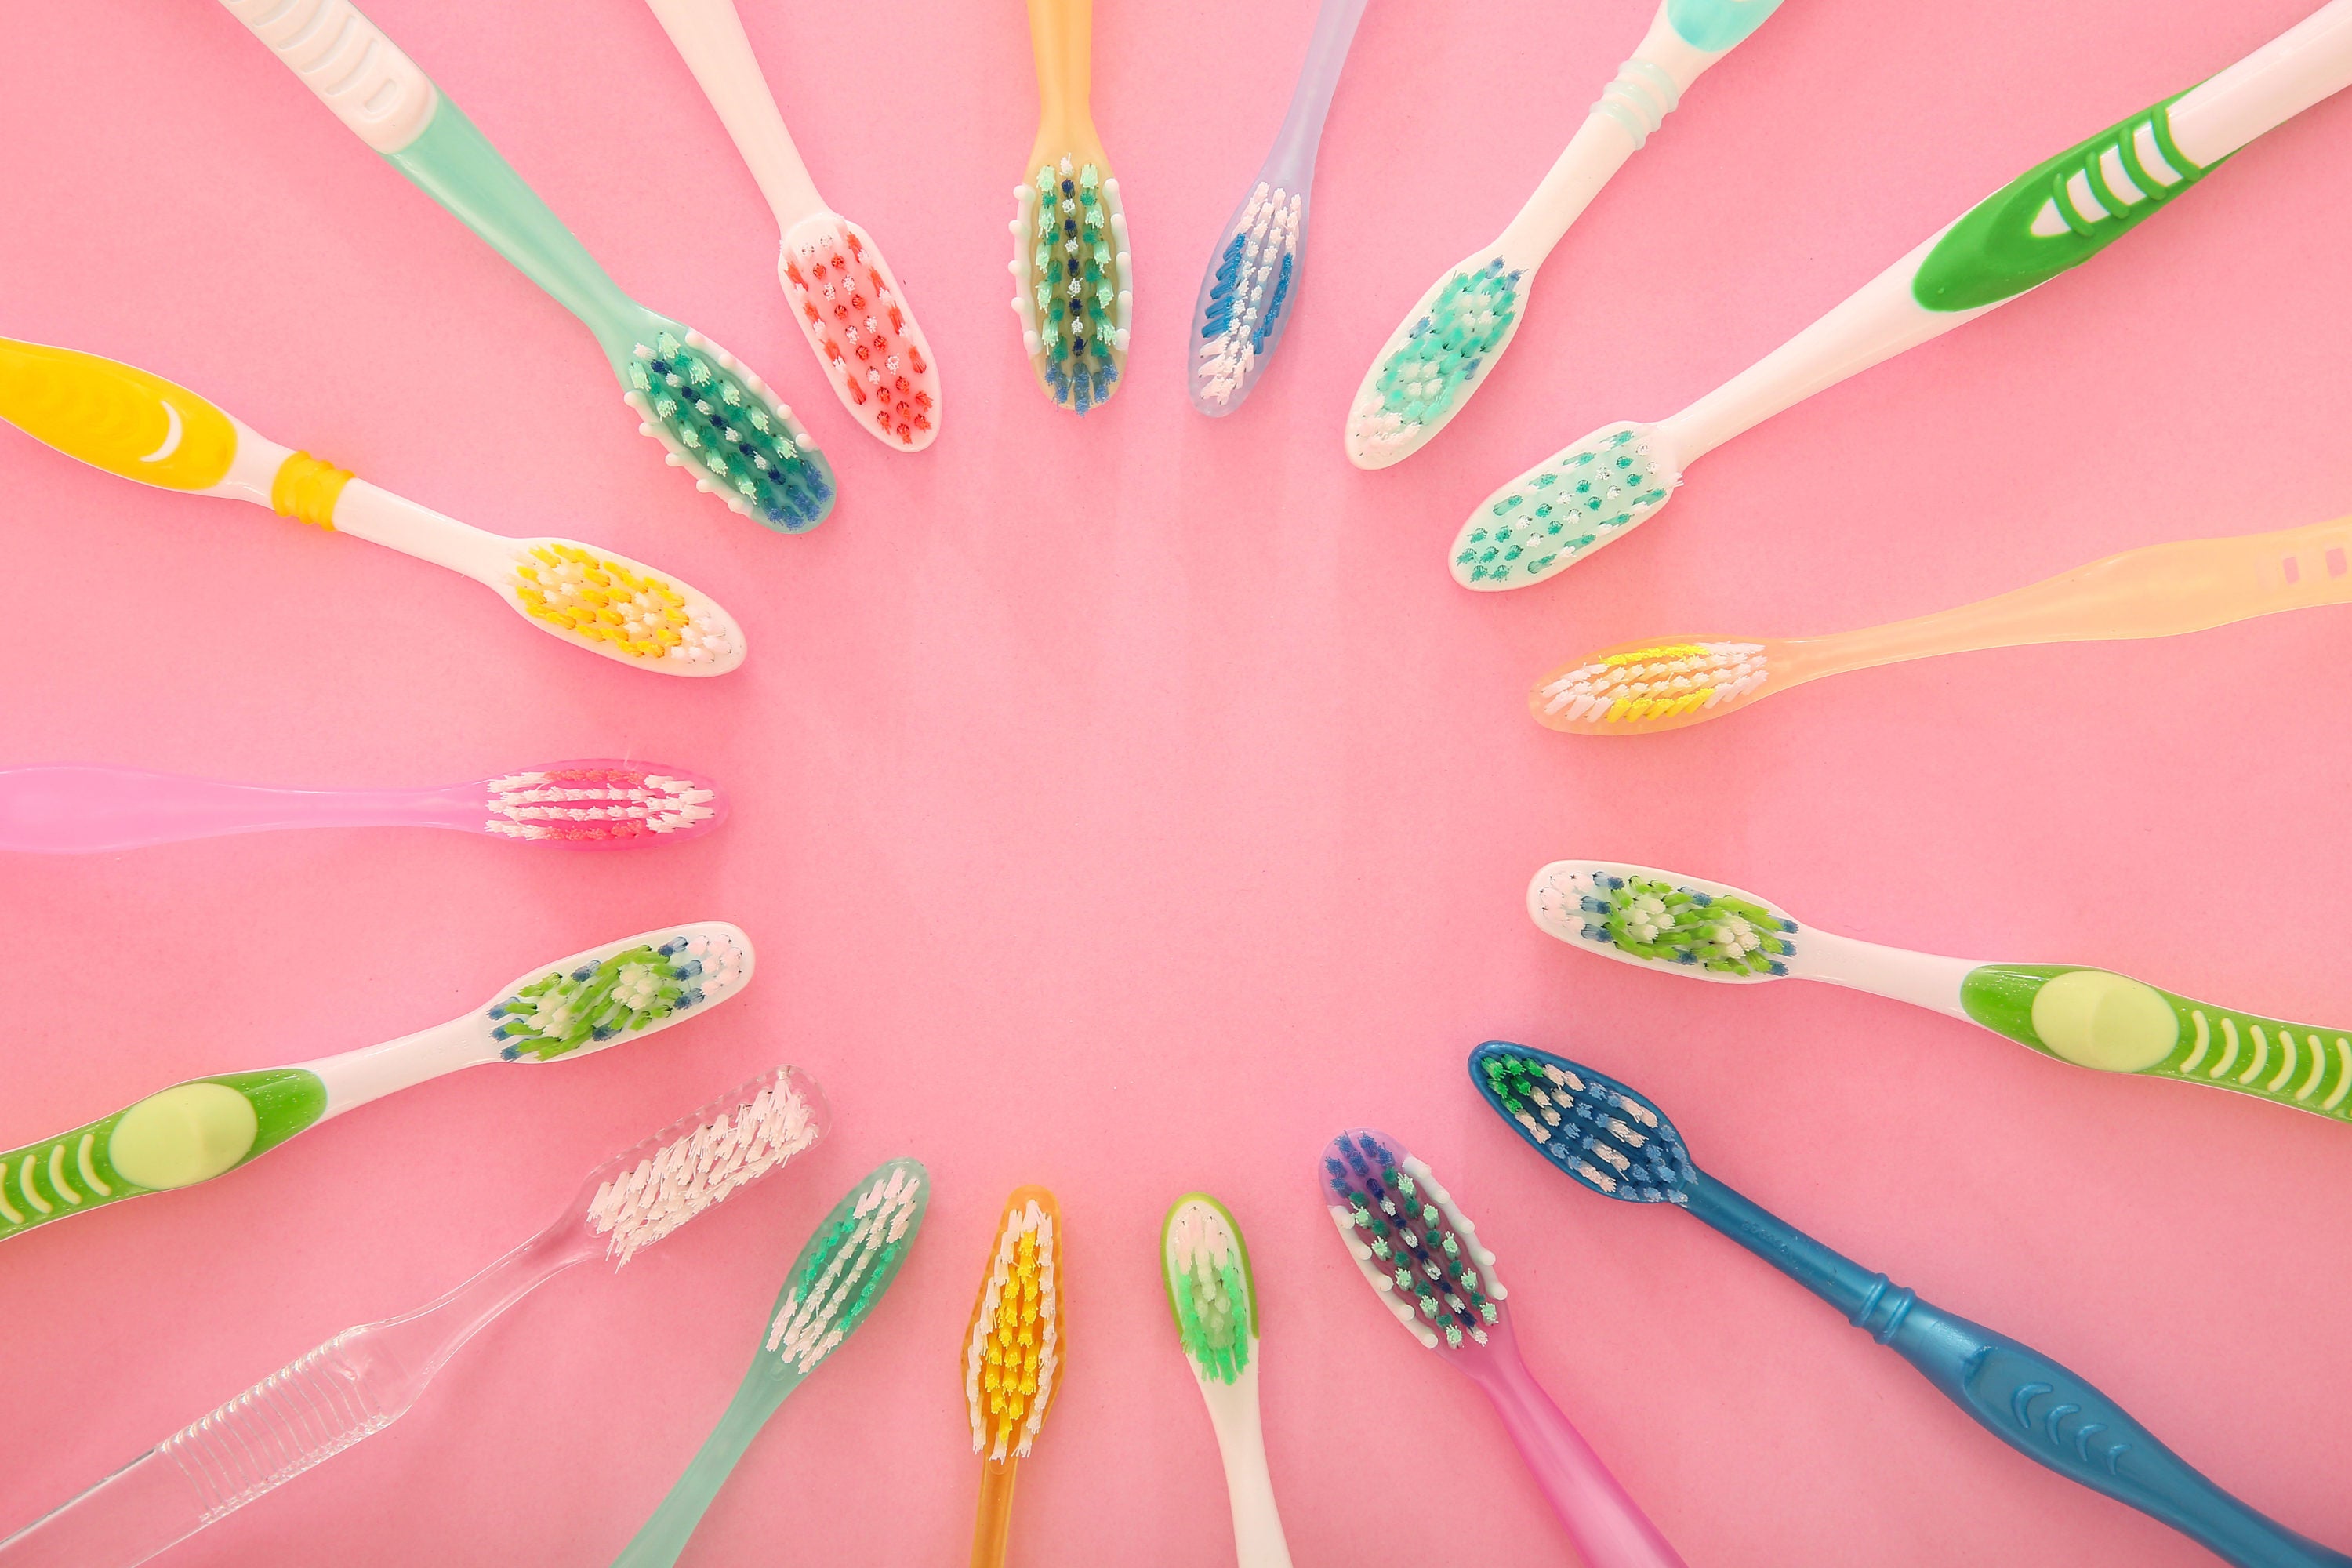 Many toothbrushes in a circle